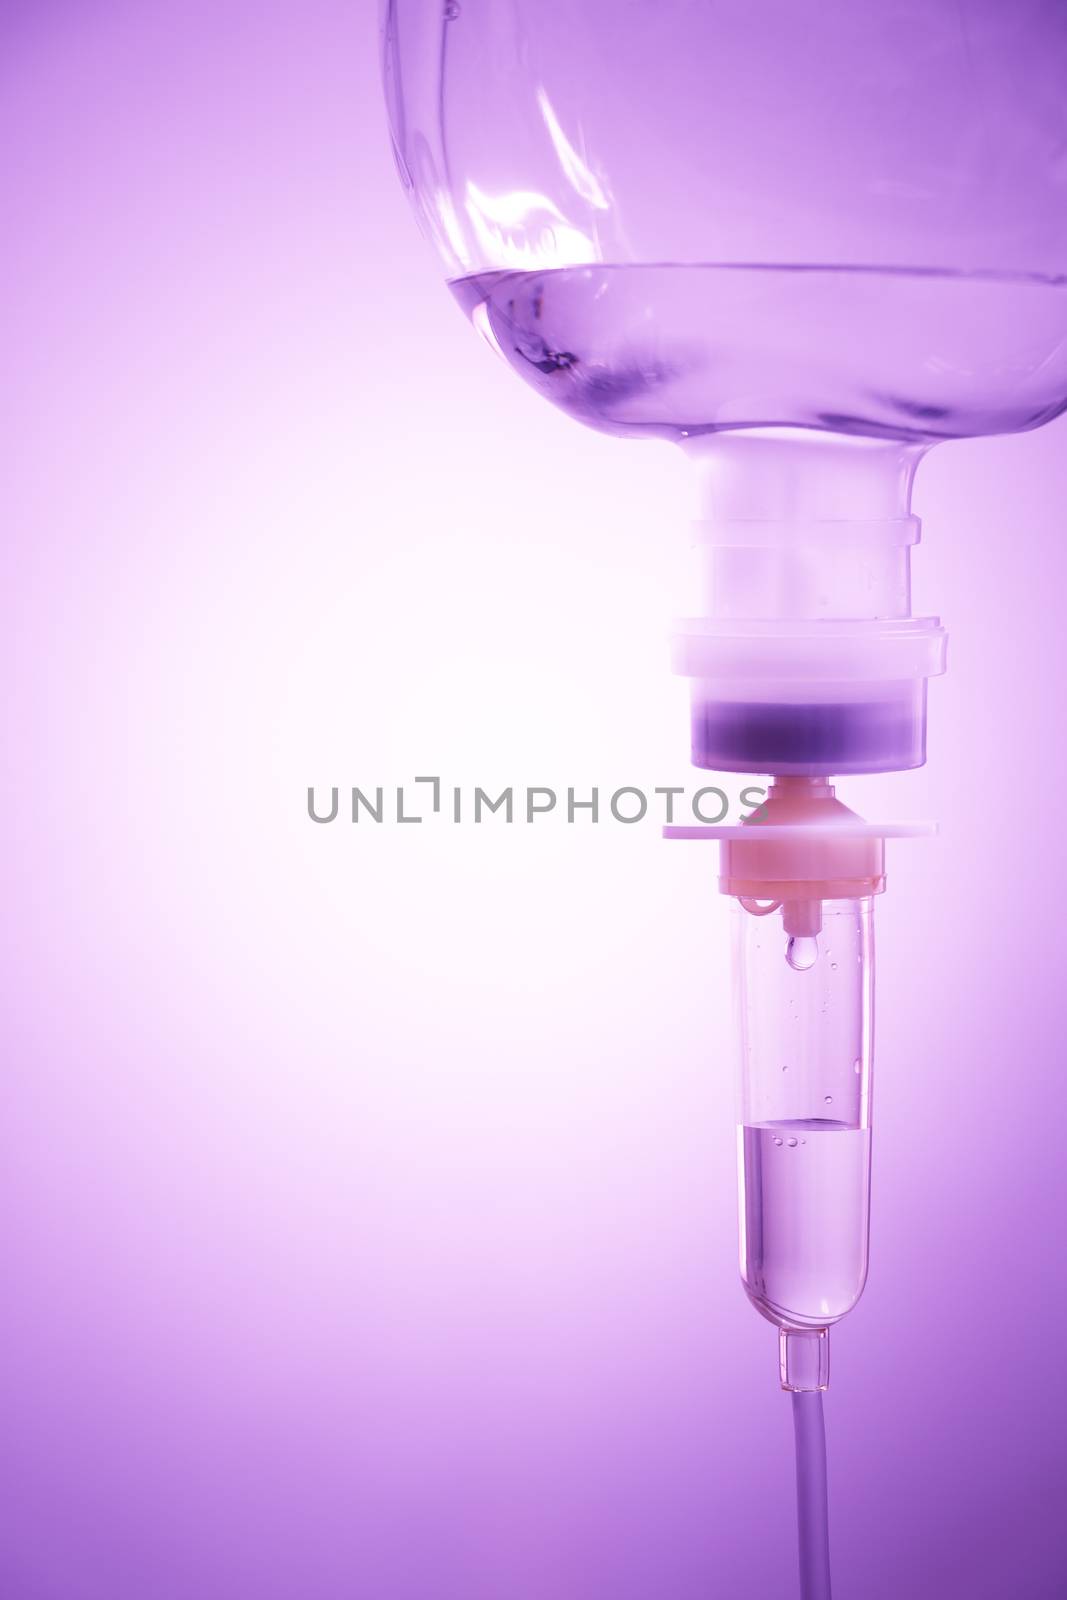 saline solution in vignette style and blank area at left side